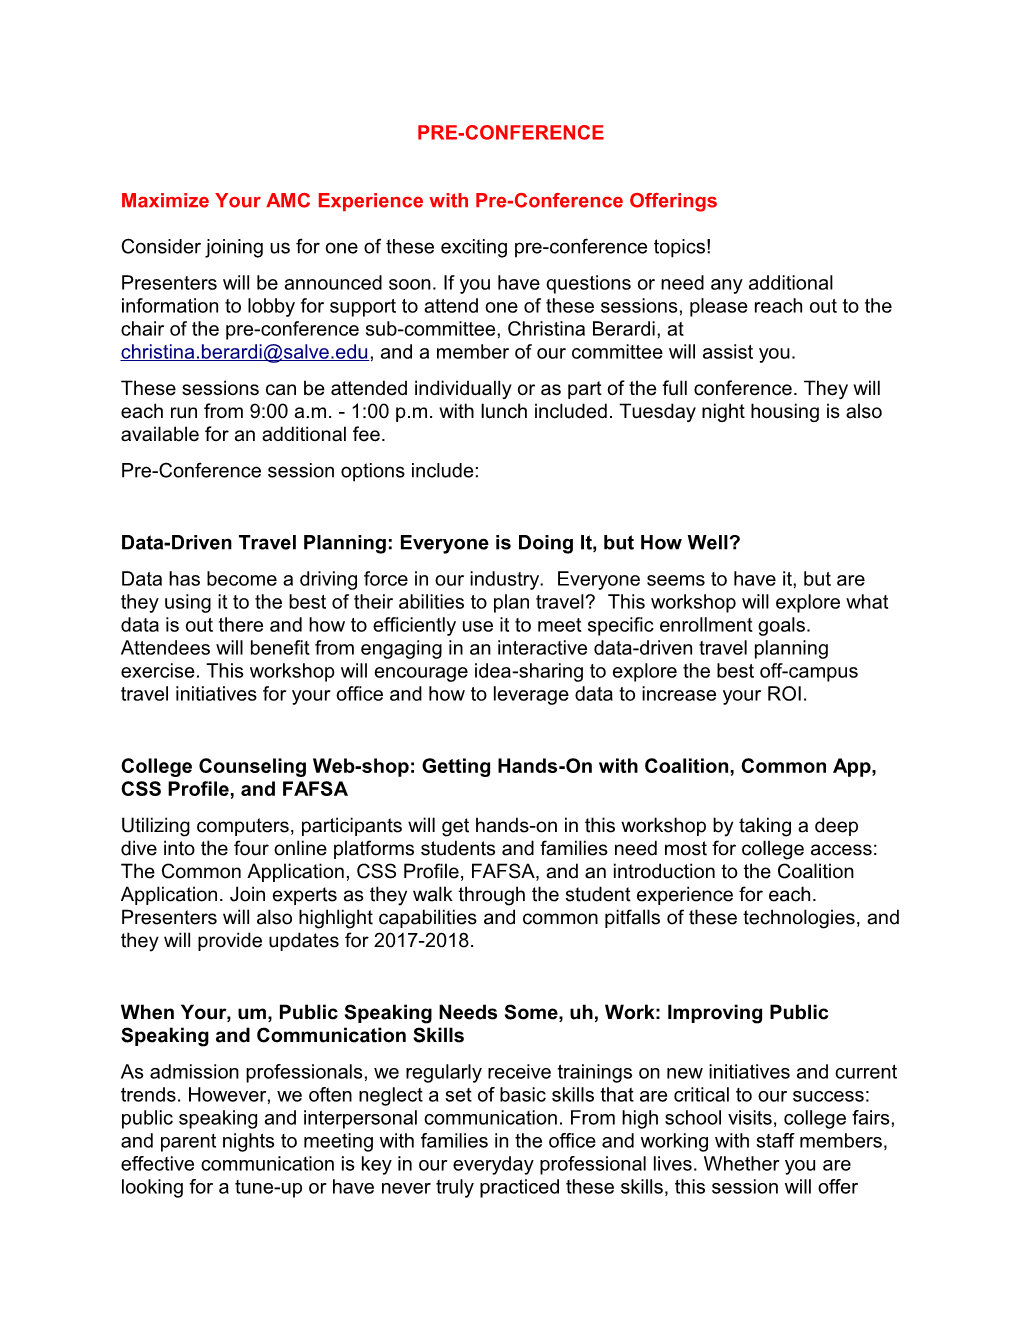 Maximize Your AMC Experience with Pre-Conference Offerings